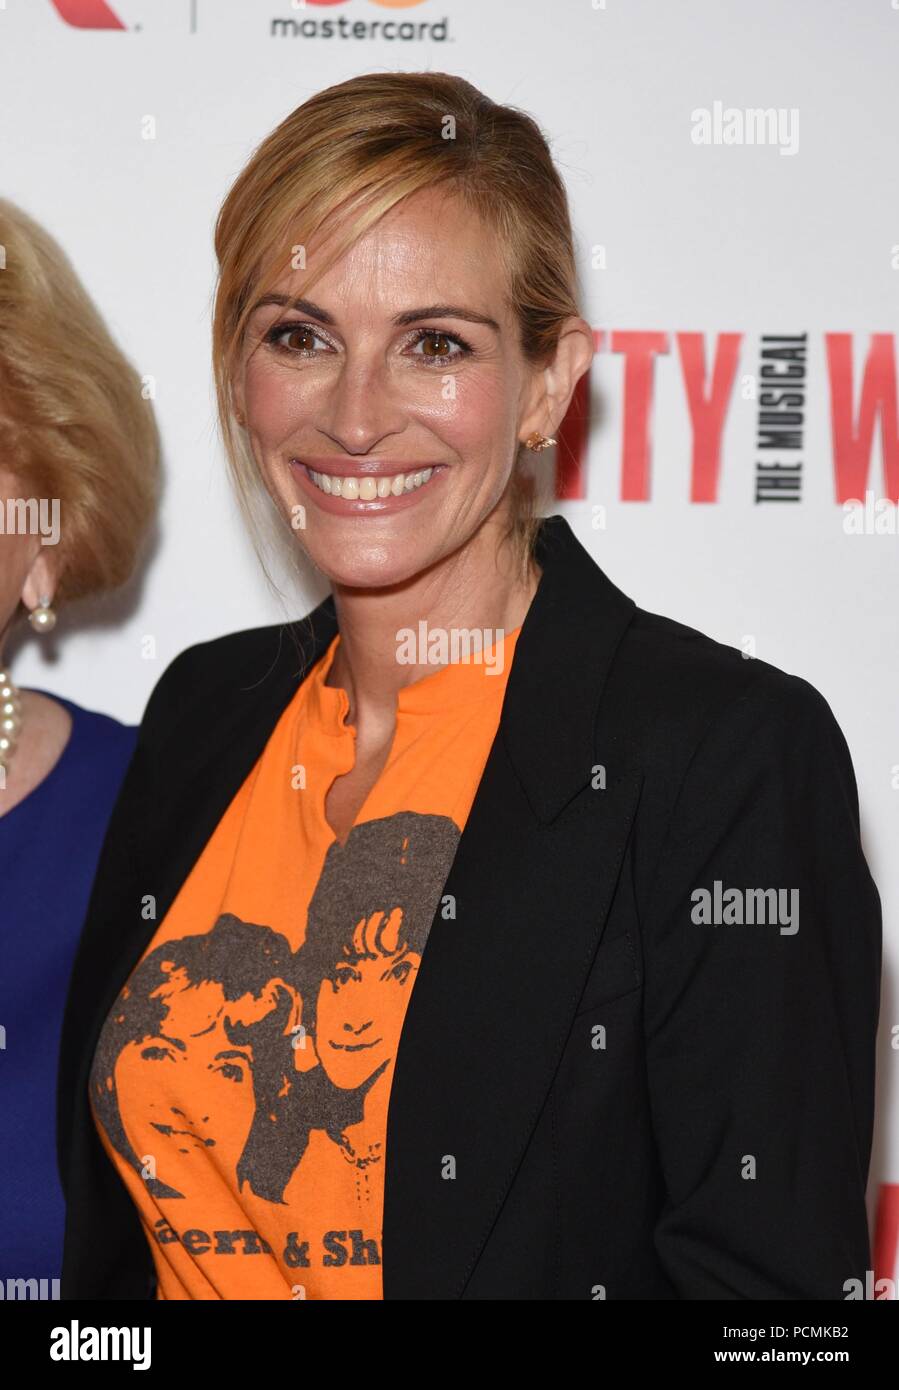 New York, NY, USA. 2nd Aug, 2018. Julia Roberts at arrivals for PRETTY WOMAN: THE MUSICAL Tribute Performance for Garry Marshall, Nederlander Theatre, New York, NY August 2, 2018. Credit: Derek Storm/Everett Collection/Alamy Live News Stock Photo